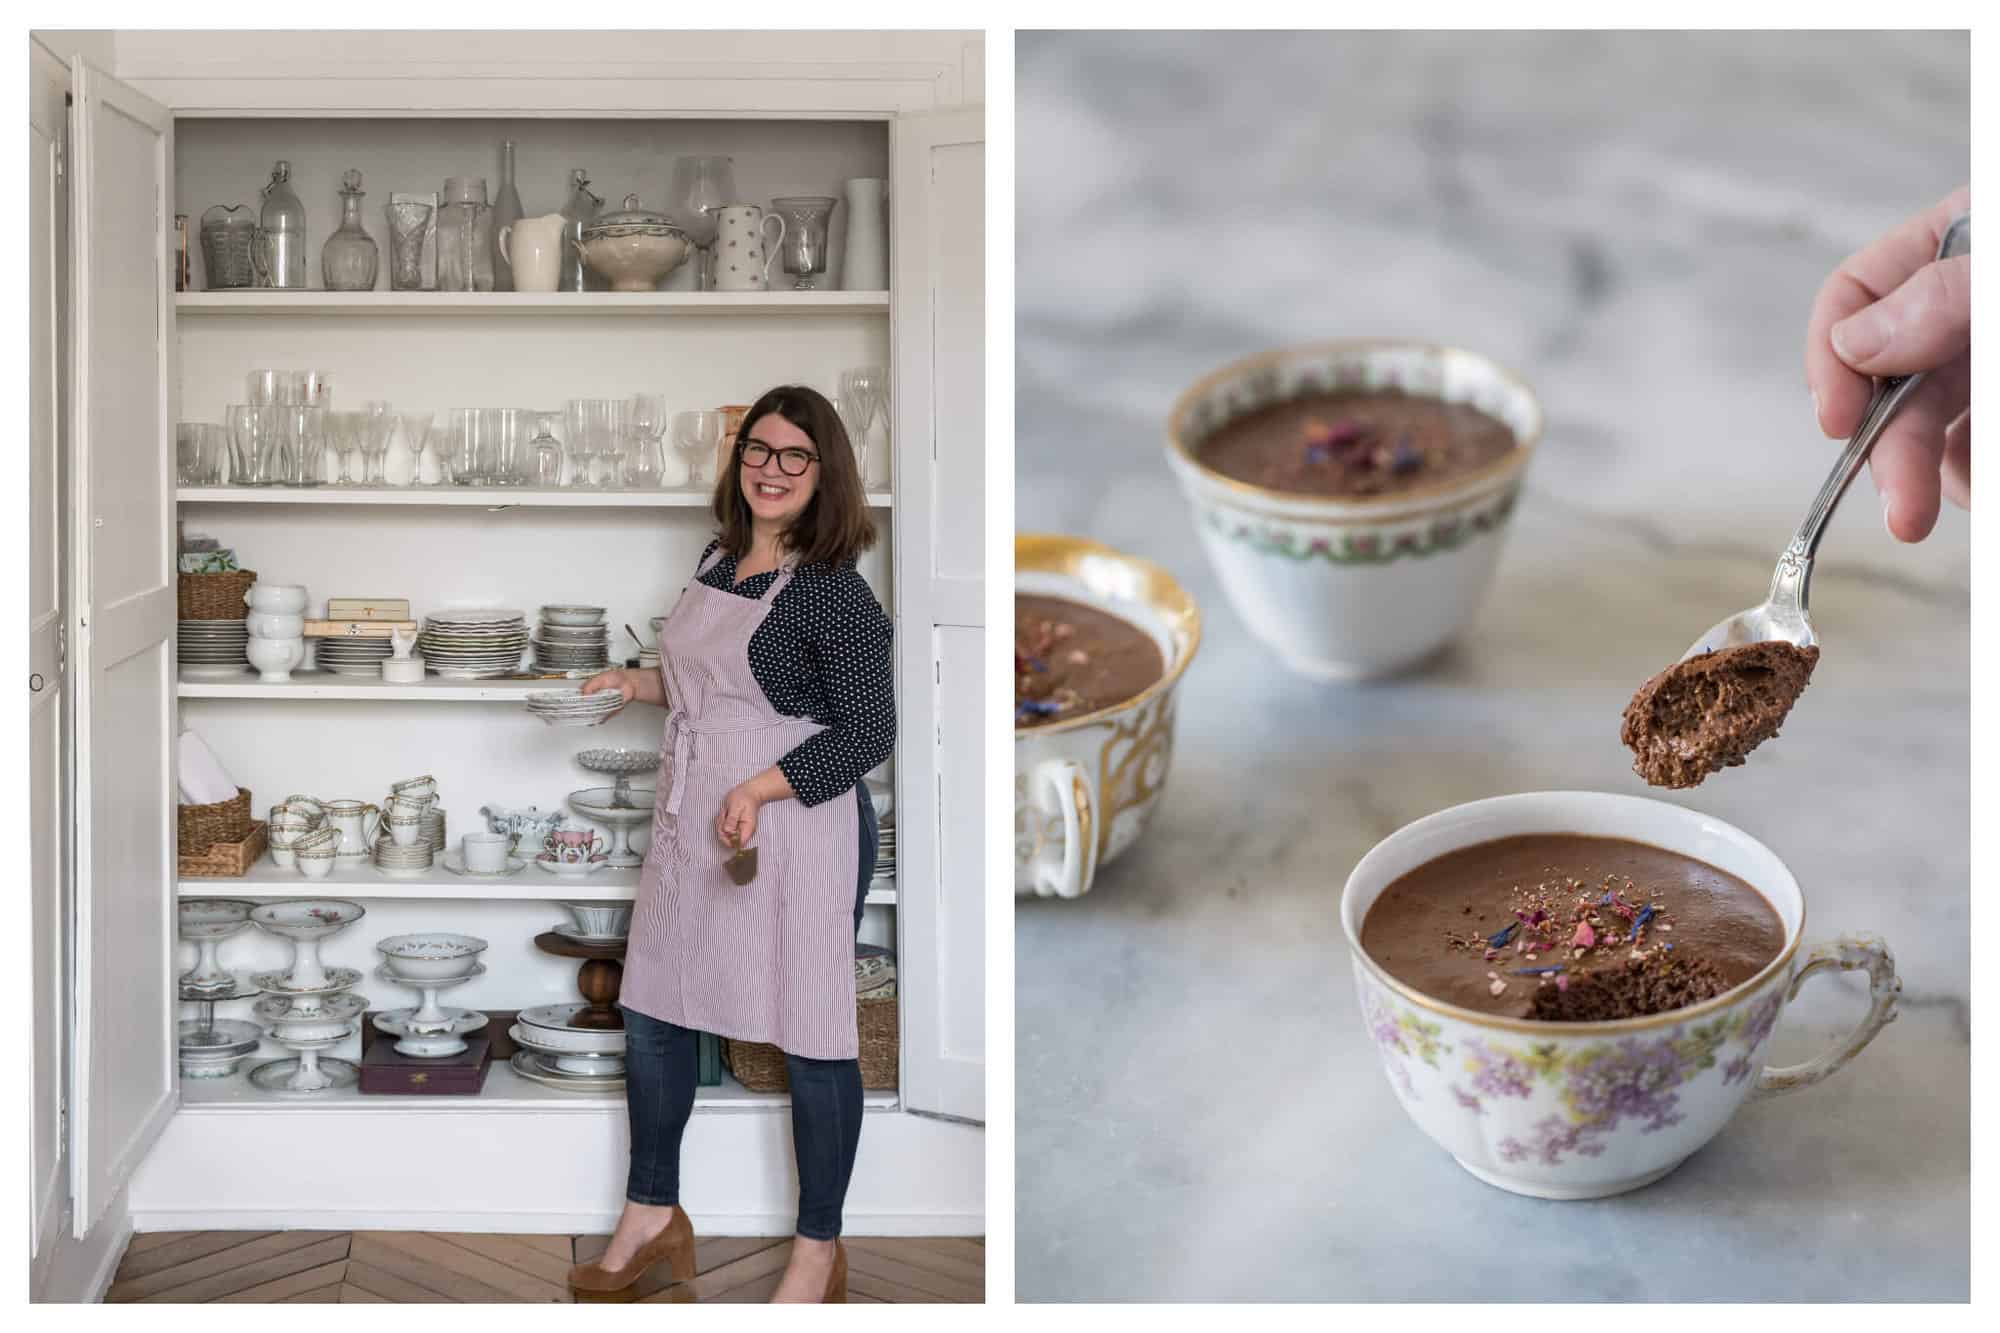 Left: the cabinet of chef Molly Wilkinson full of glass crockeries and bakeware. Chef Molly Wilkinson is standing in front of it.. Right: a mug of choclate mousse. There is a hand that is scooping one spoonful of mousse out of it.